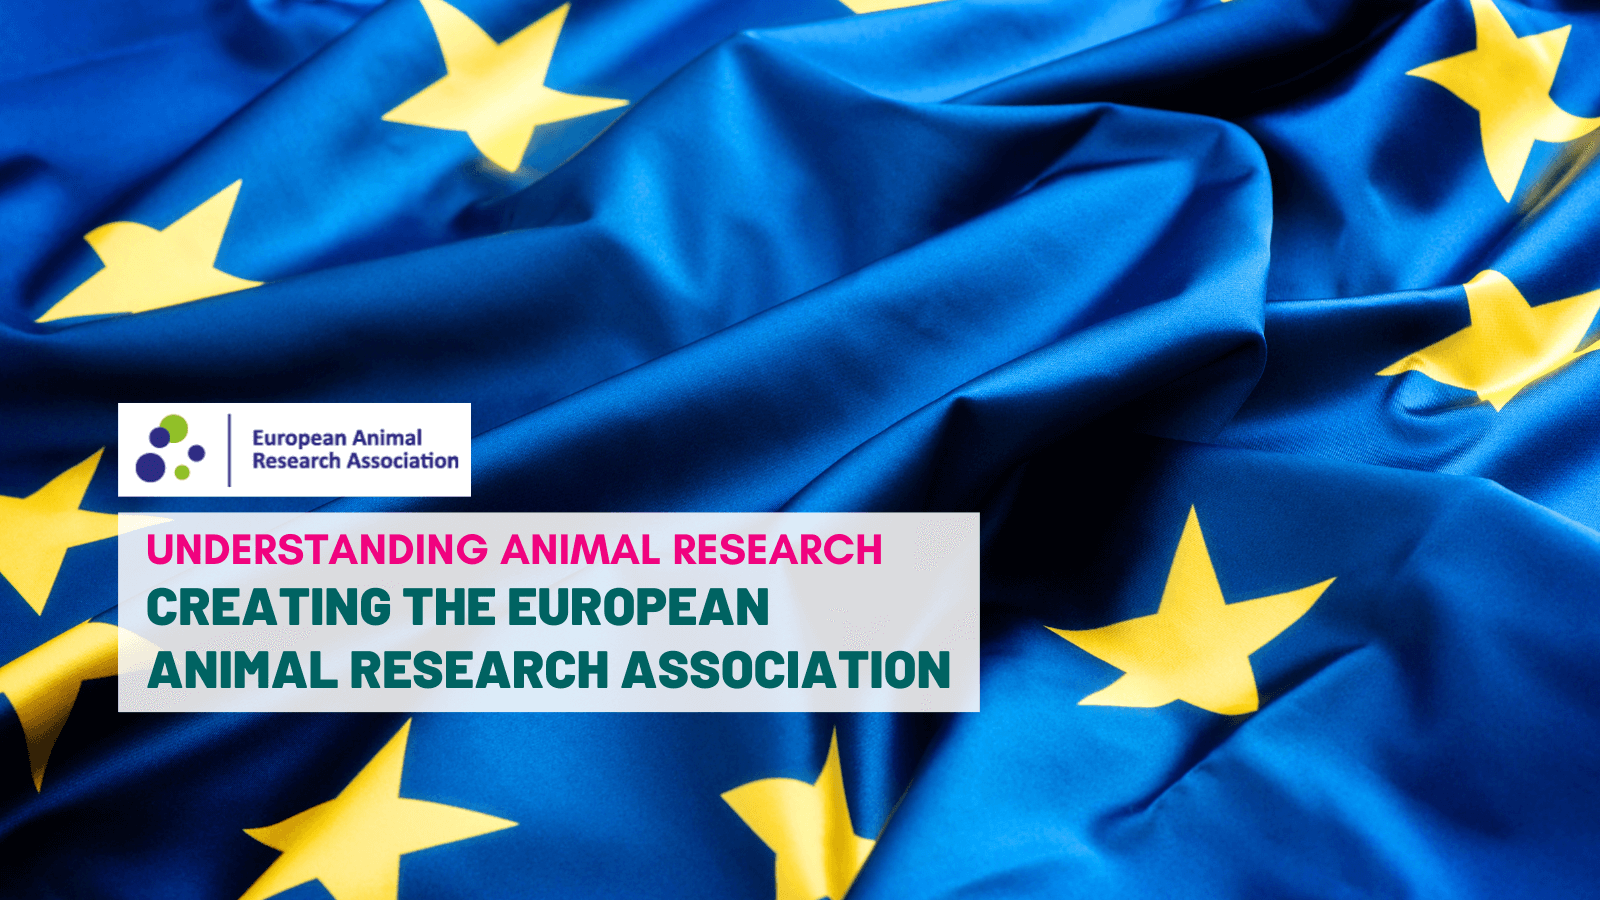 The reason the European Citizens’ Initiative failed is the reason anti-research campaigns are failing generally